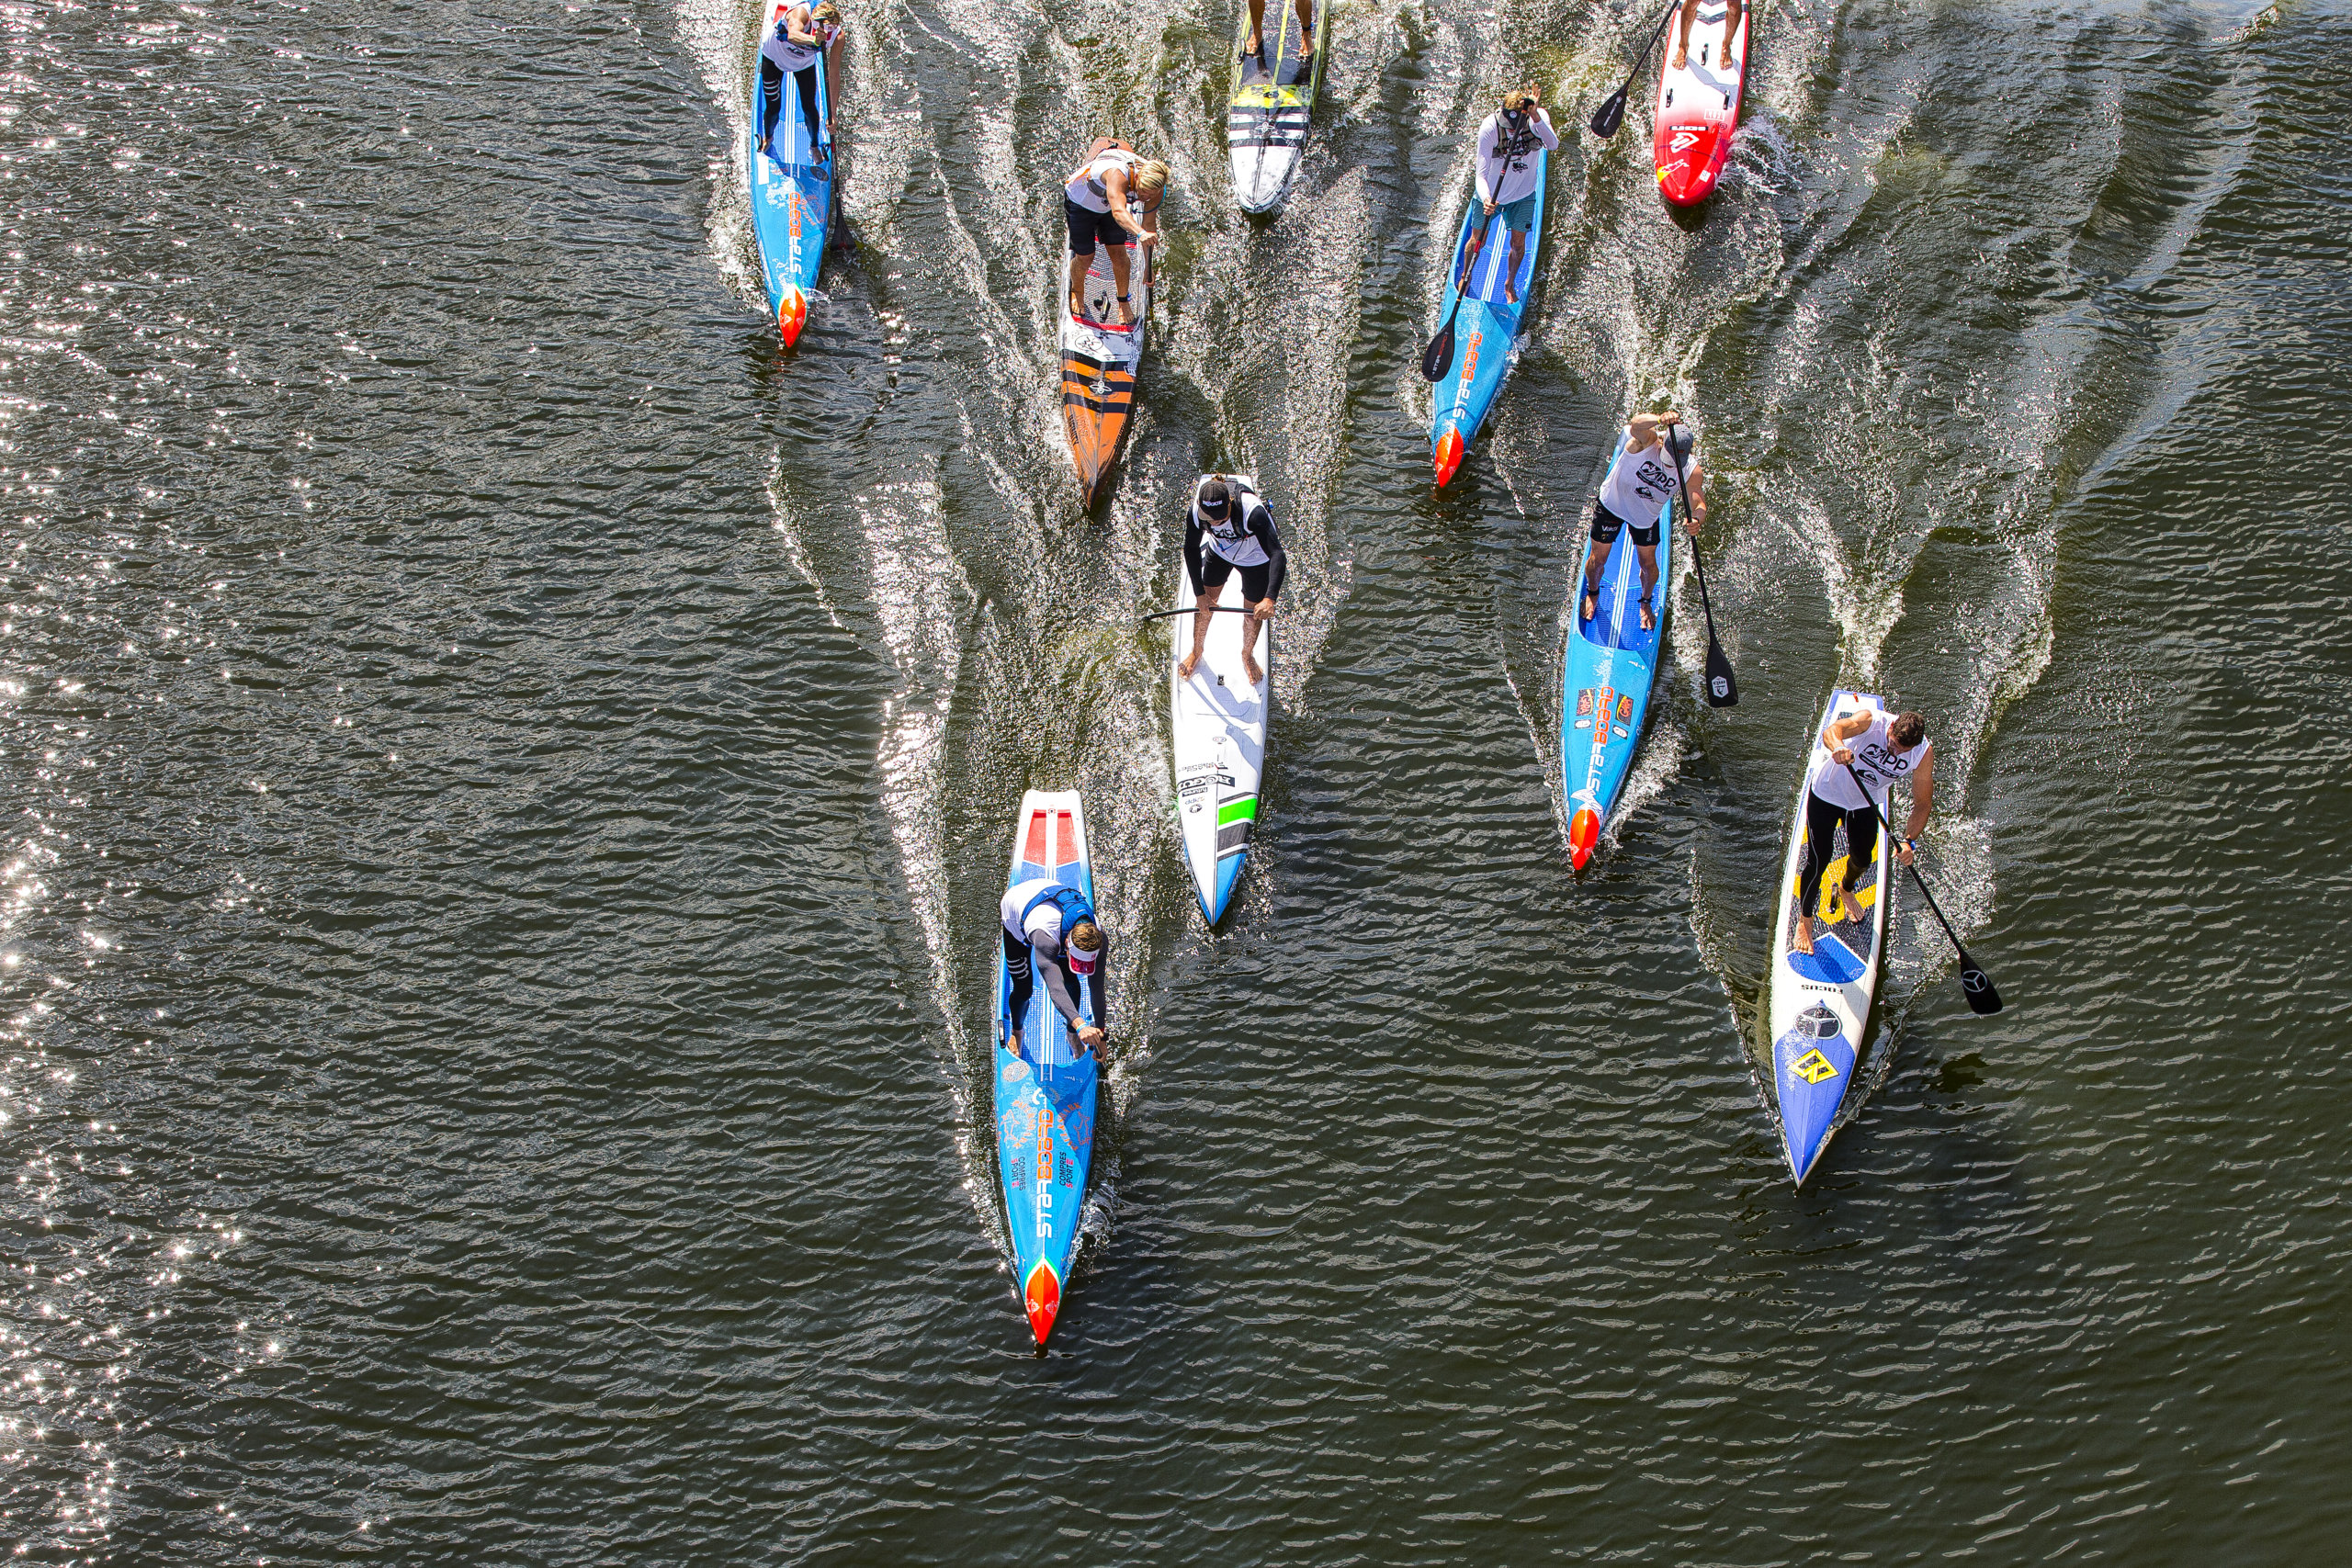 Drone's view of stand-up paddle race